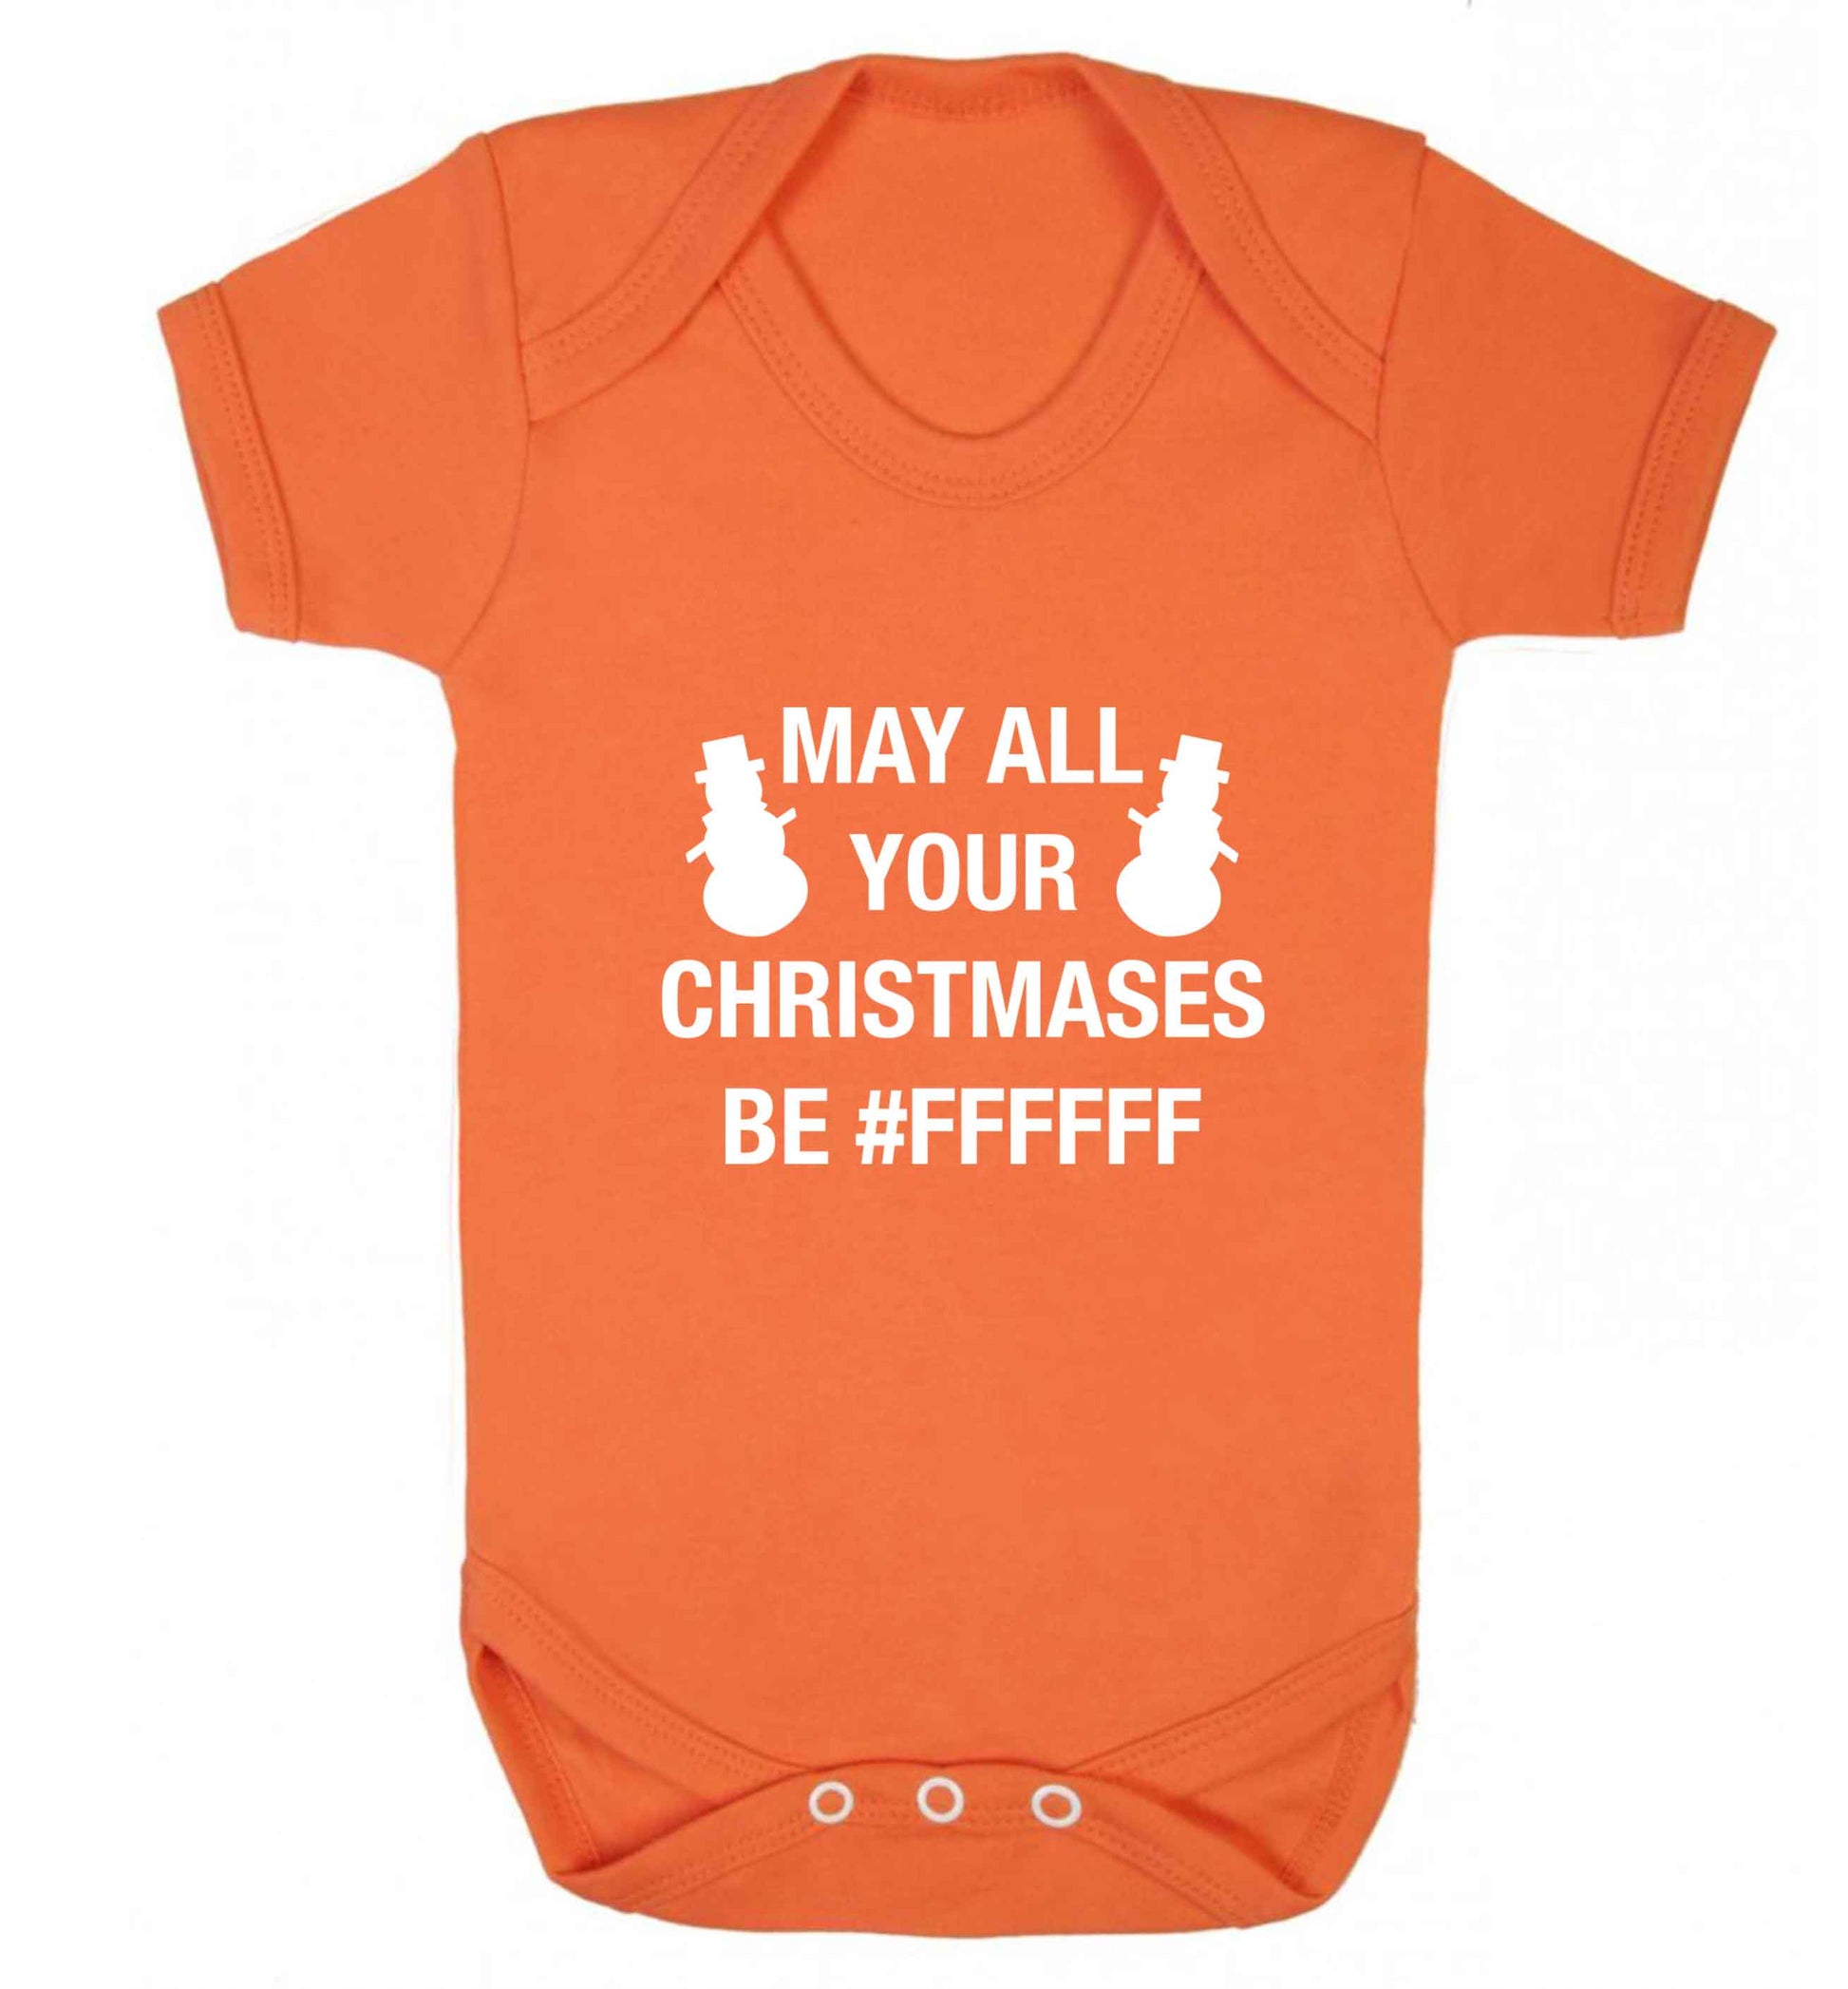 May all your Christmases be #FFFFFF baby vest orange 18-24 months